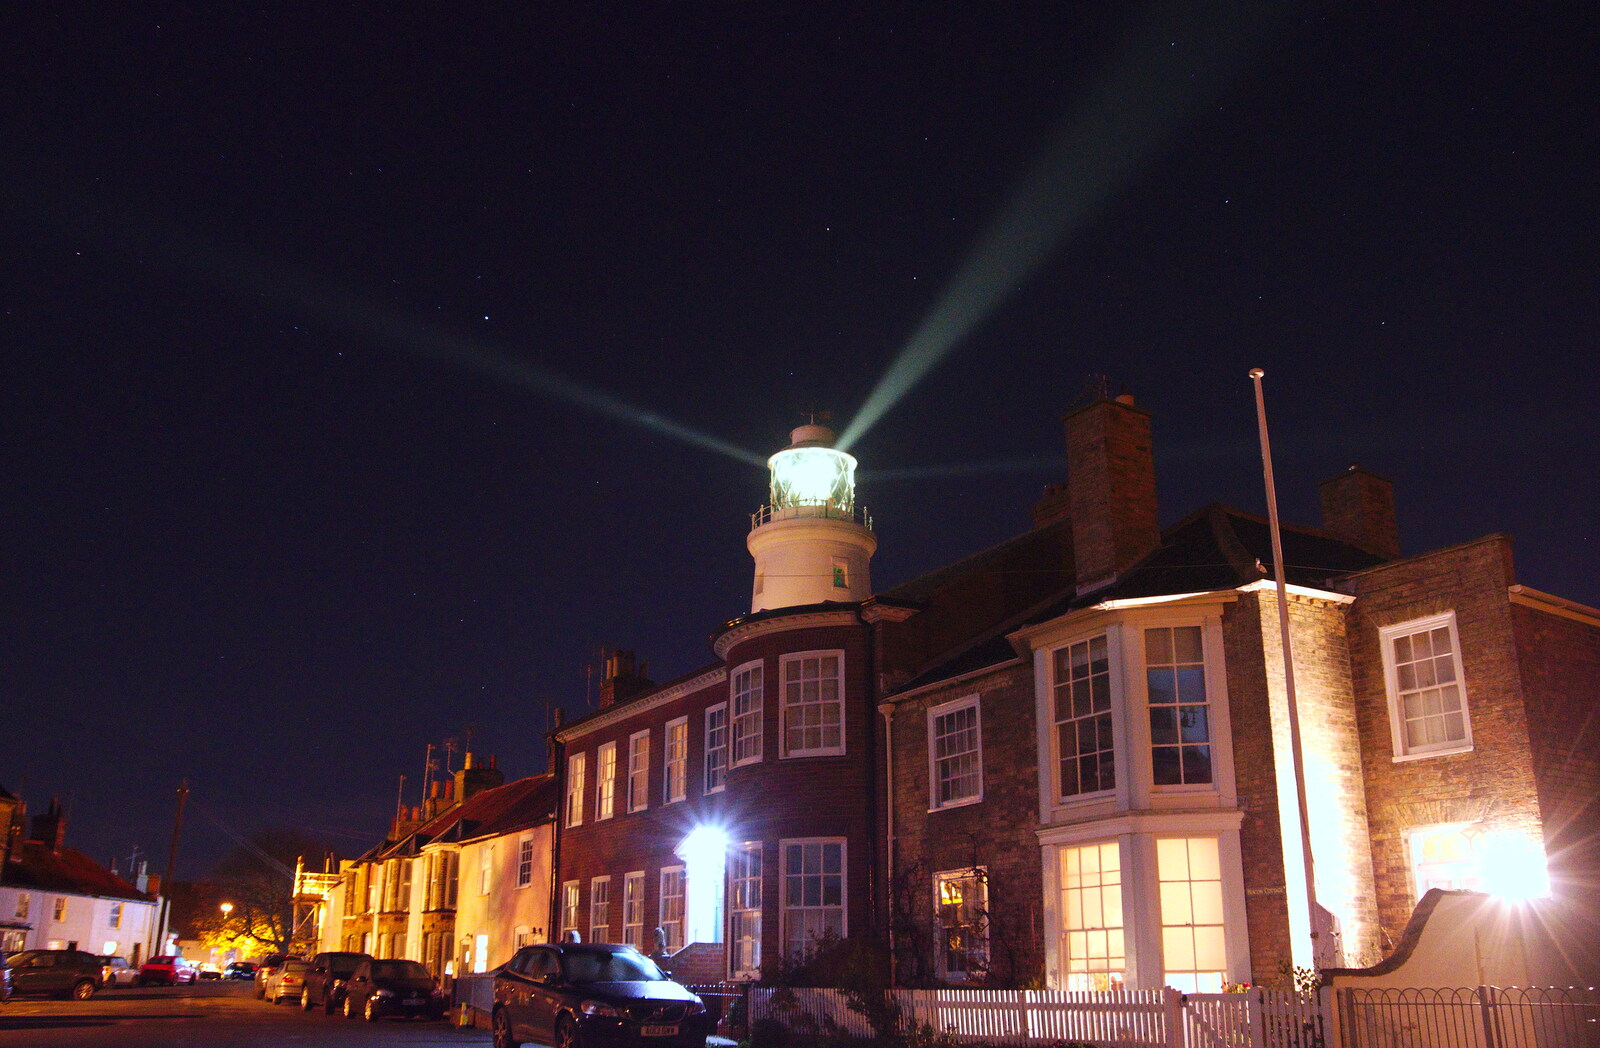 Beams of light spill out from the lighthouse from A Night at the Crown Hotel, Southwold, Suffolk - 8th November 2019